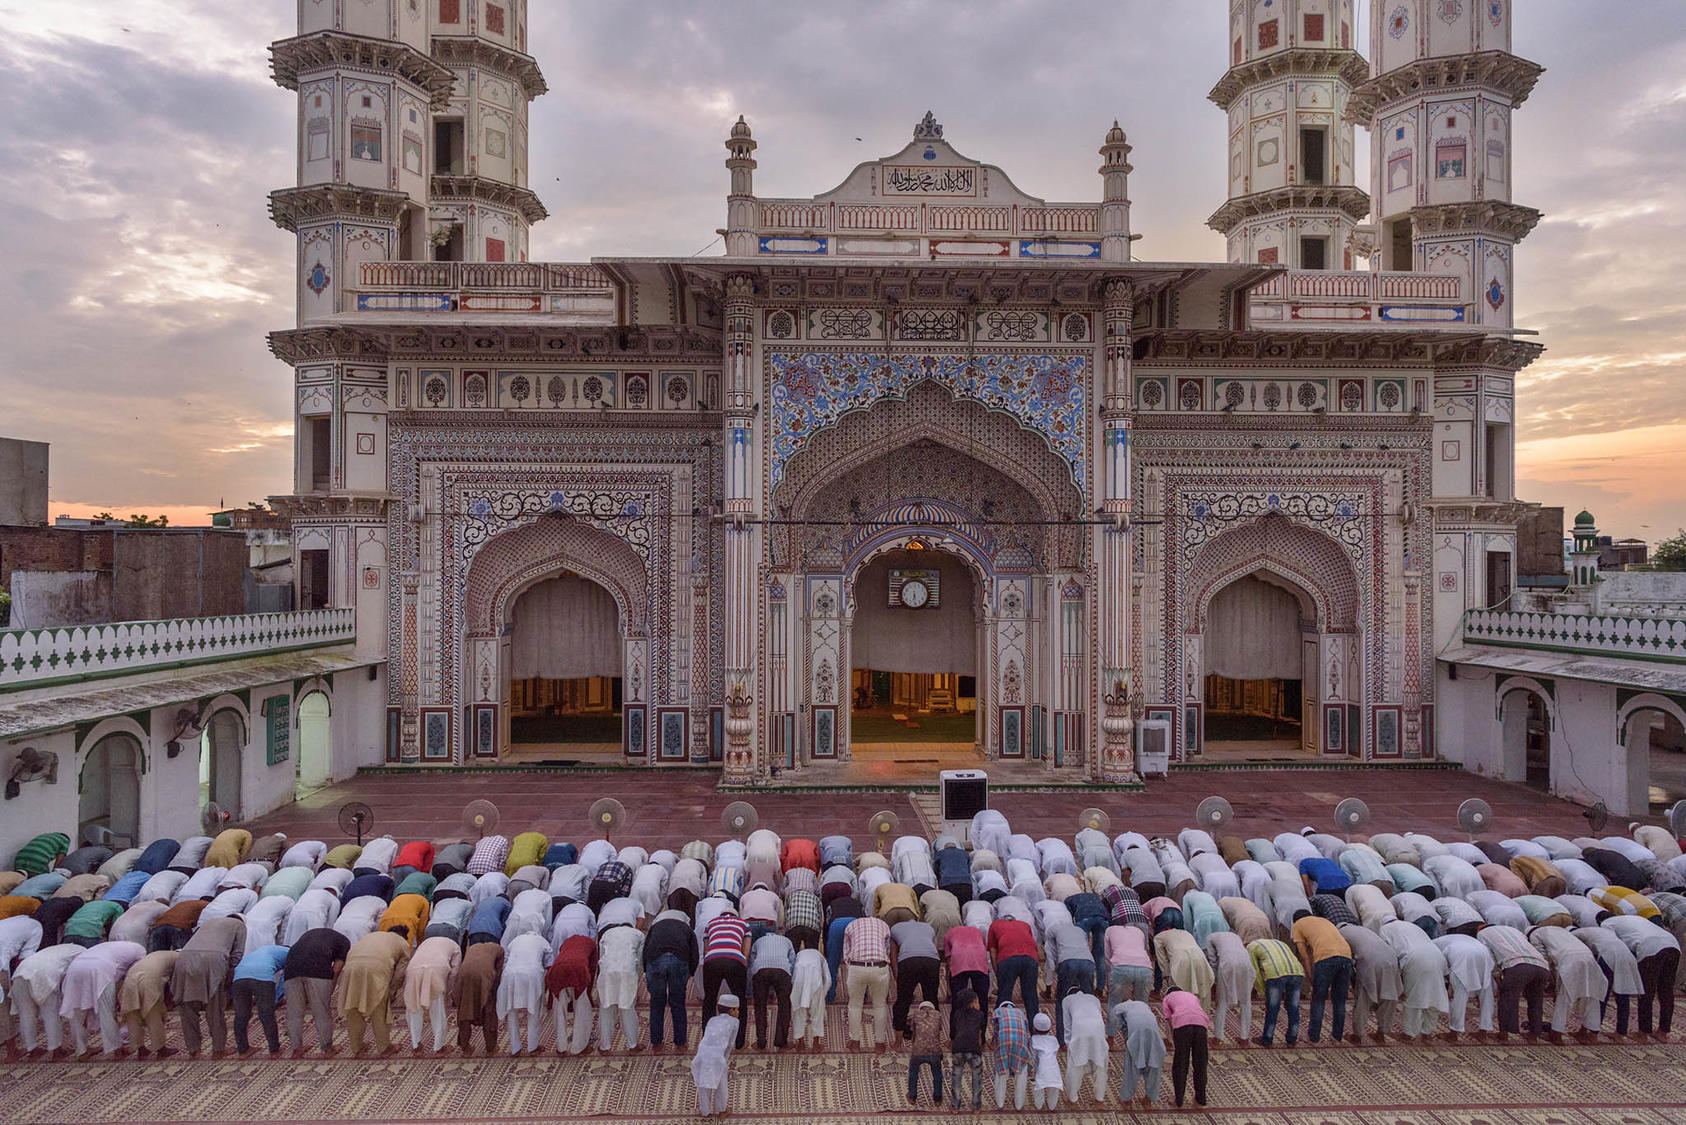 Muslims pray at a mosque in Tonk, India, on Sept. 28, 2019. A wave of protests against a new citizenship law broke out in cities across India, as demonstrators fear it could endanger the nation’s Muslim minority and chip away at the government’s secular identity. (Smita Sharma/The New York Times)